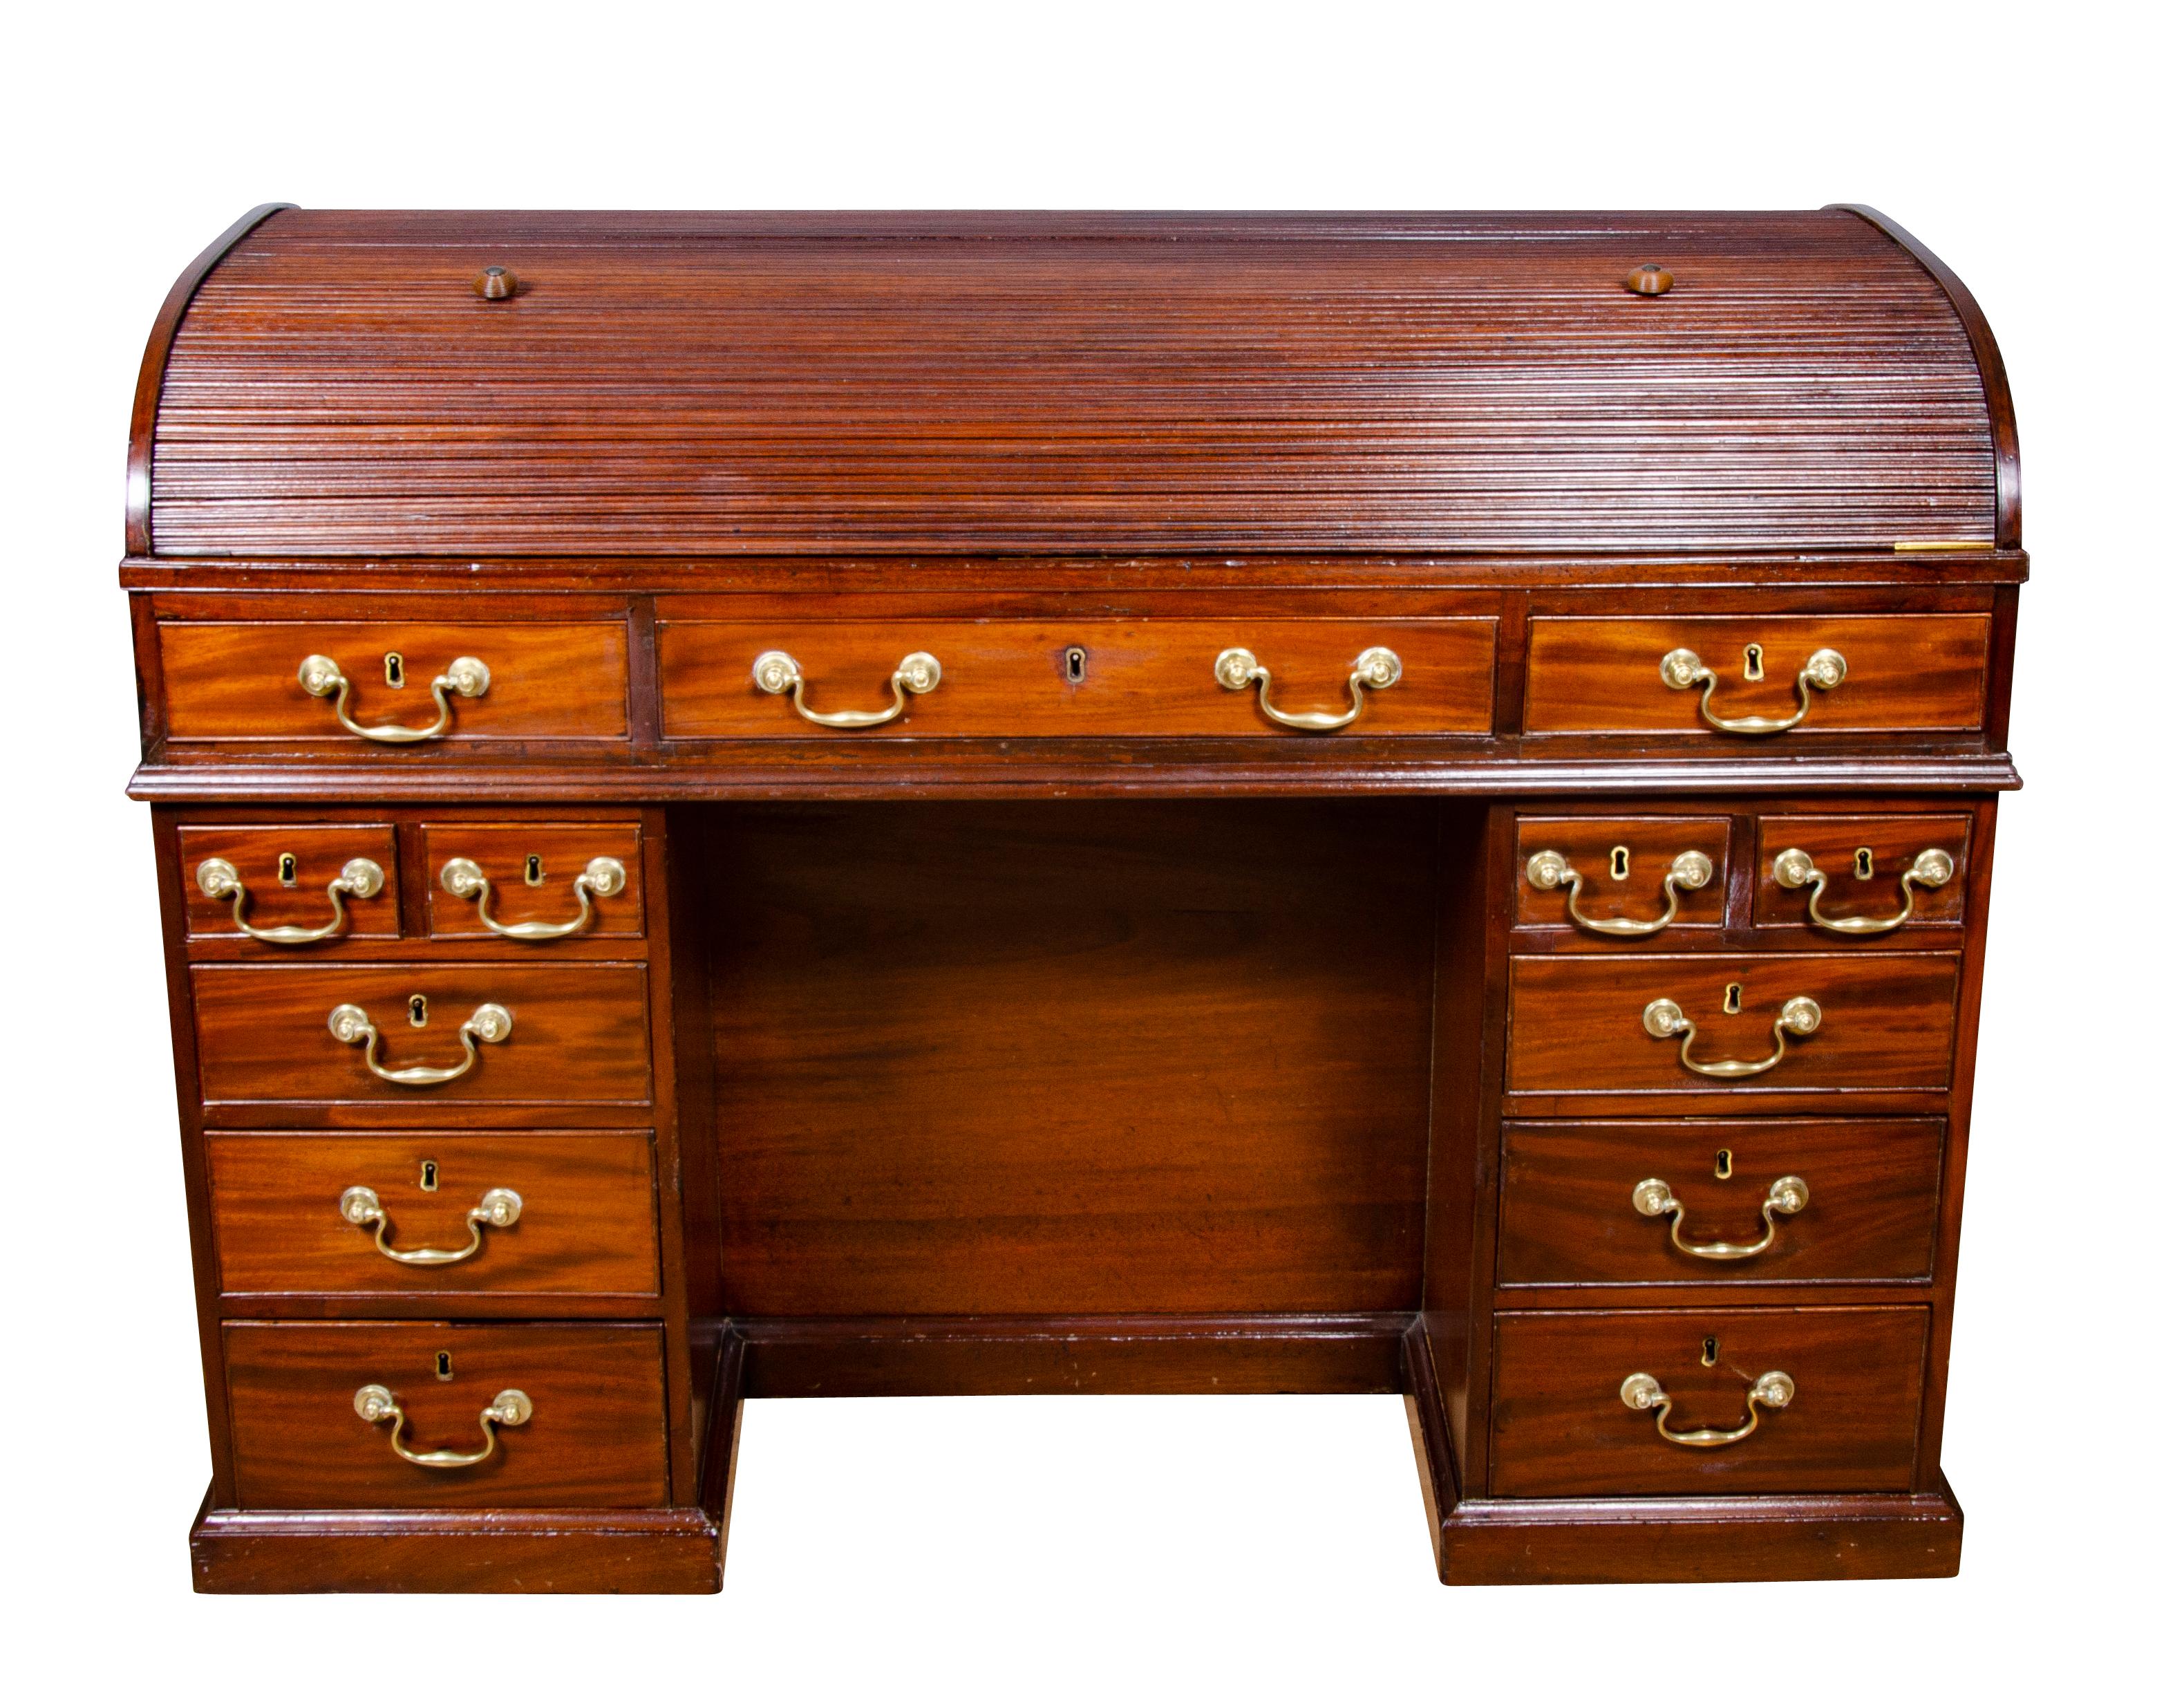 Beautiful quality with tambour roll top opening to expose a fitted desk with drawers, cubby holes and leather writing surface, over a long drawer flanked by a small drawer over pedestals with drawers surrounding a kneehole , the back with three